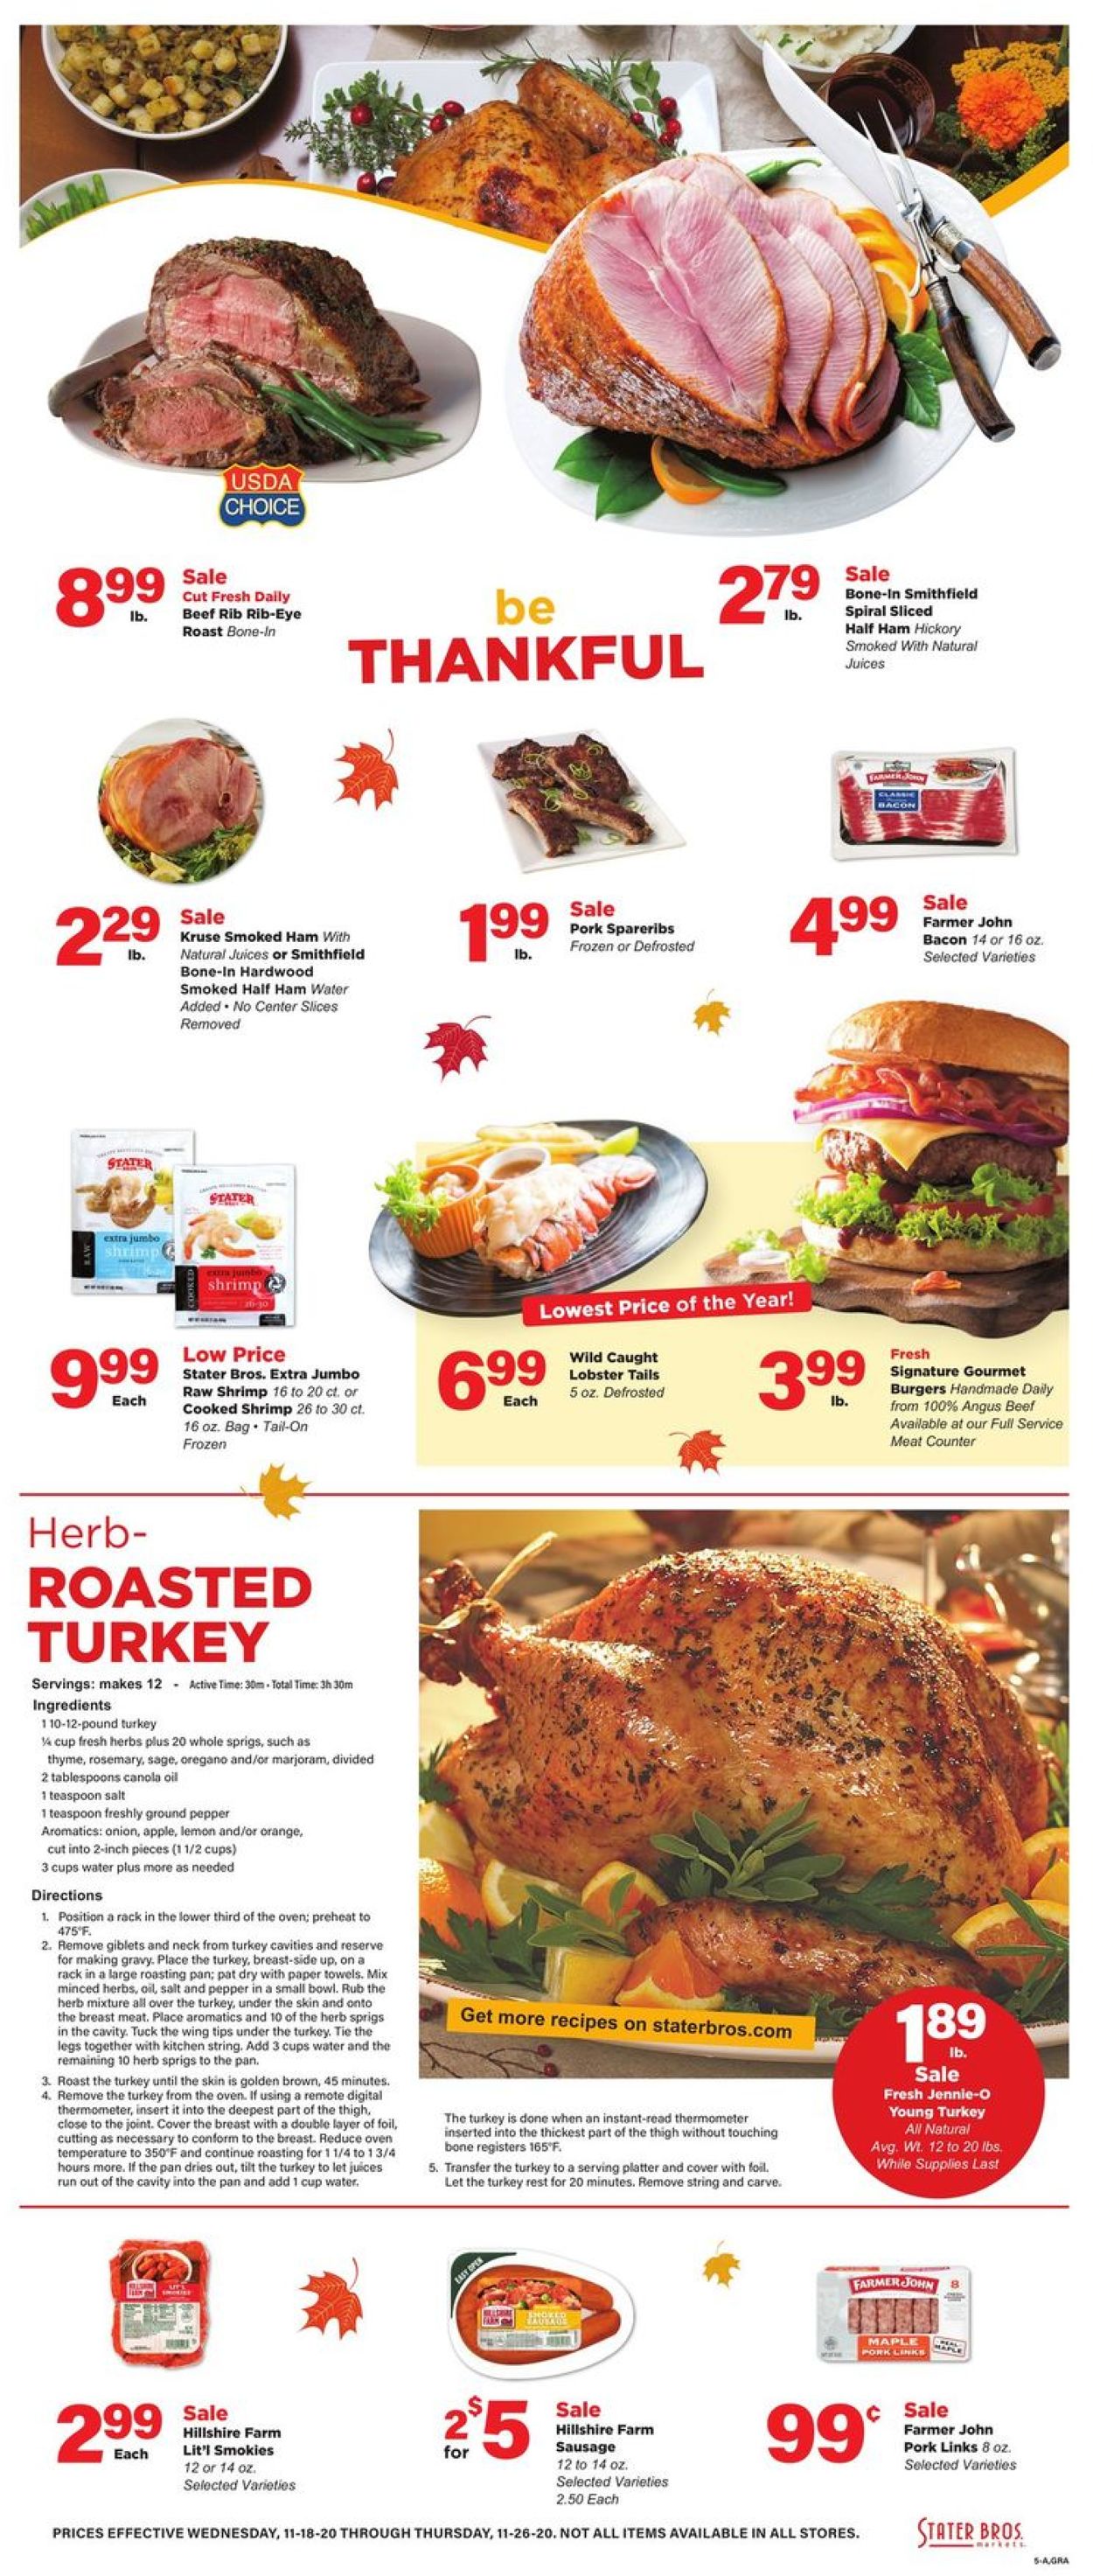 Stater Bros. Thanksgiving ad 2020 Current weekly ad 11/18 11/26/2020